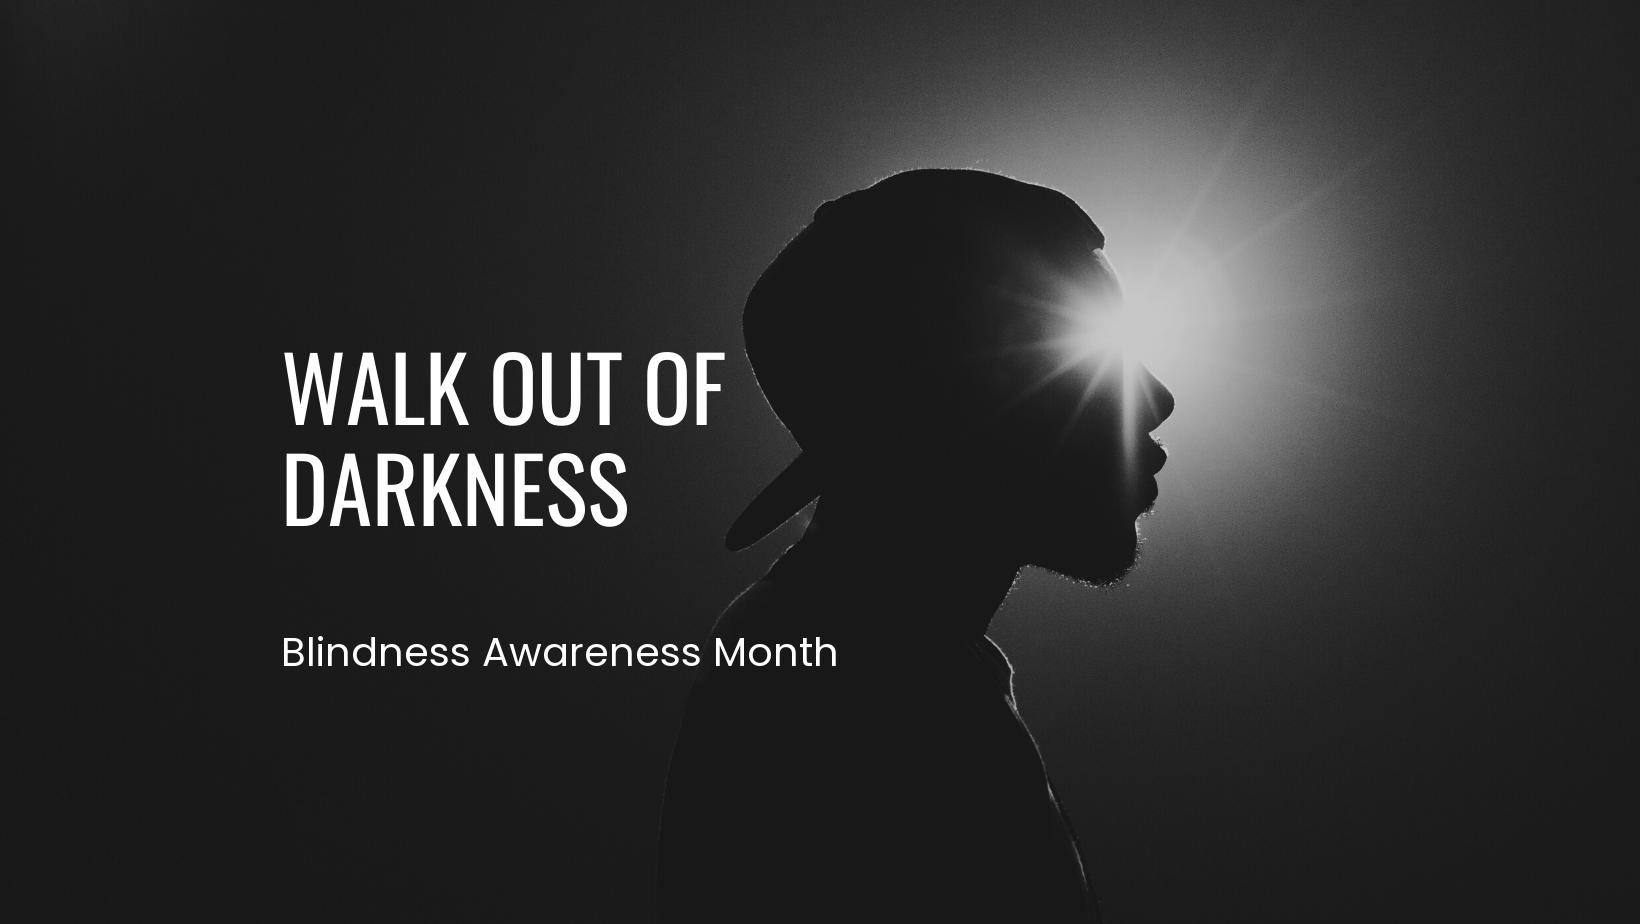 Walk out of darkness-831